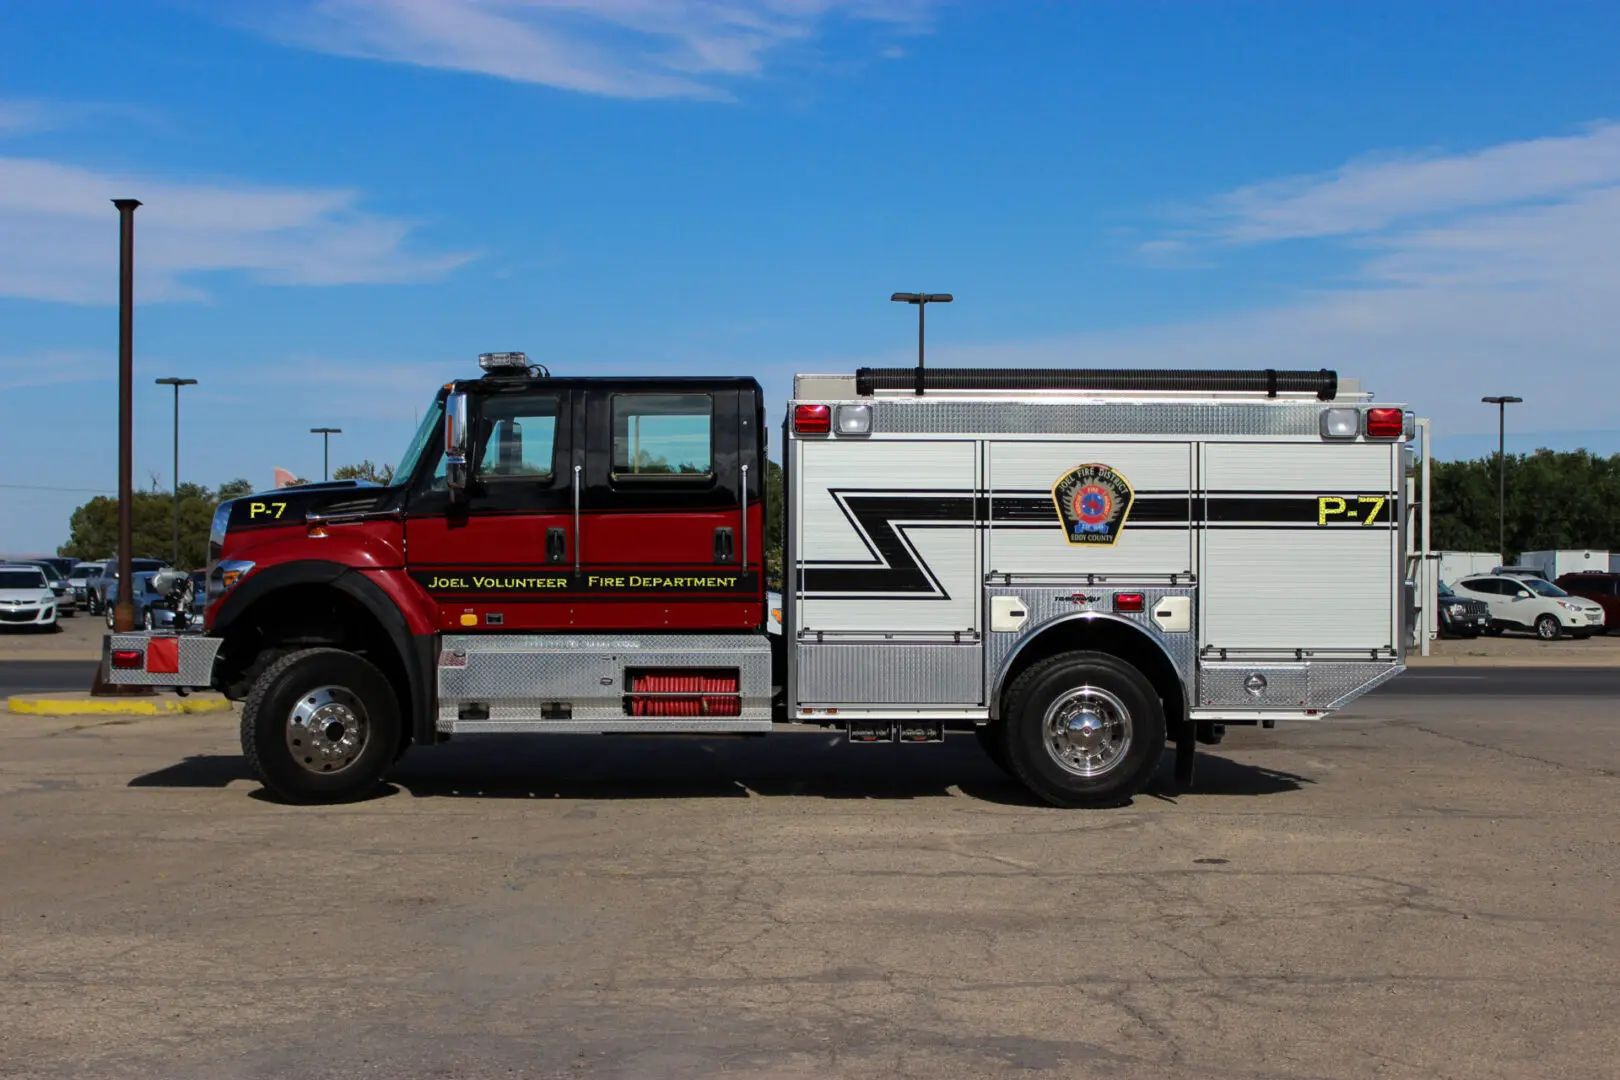 A Fire Engine truck in White and Red Color